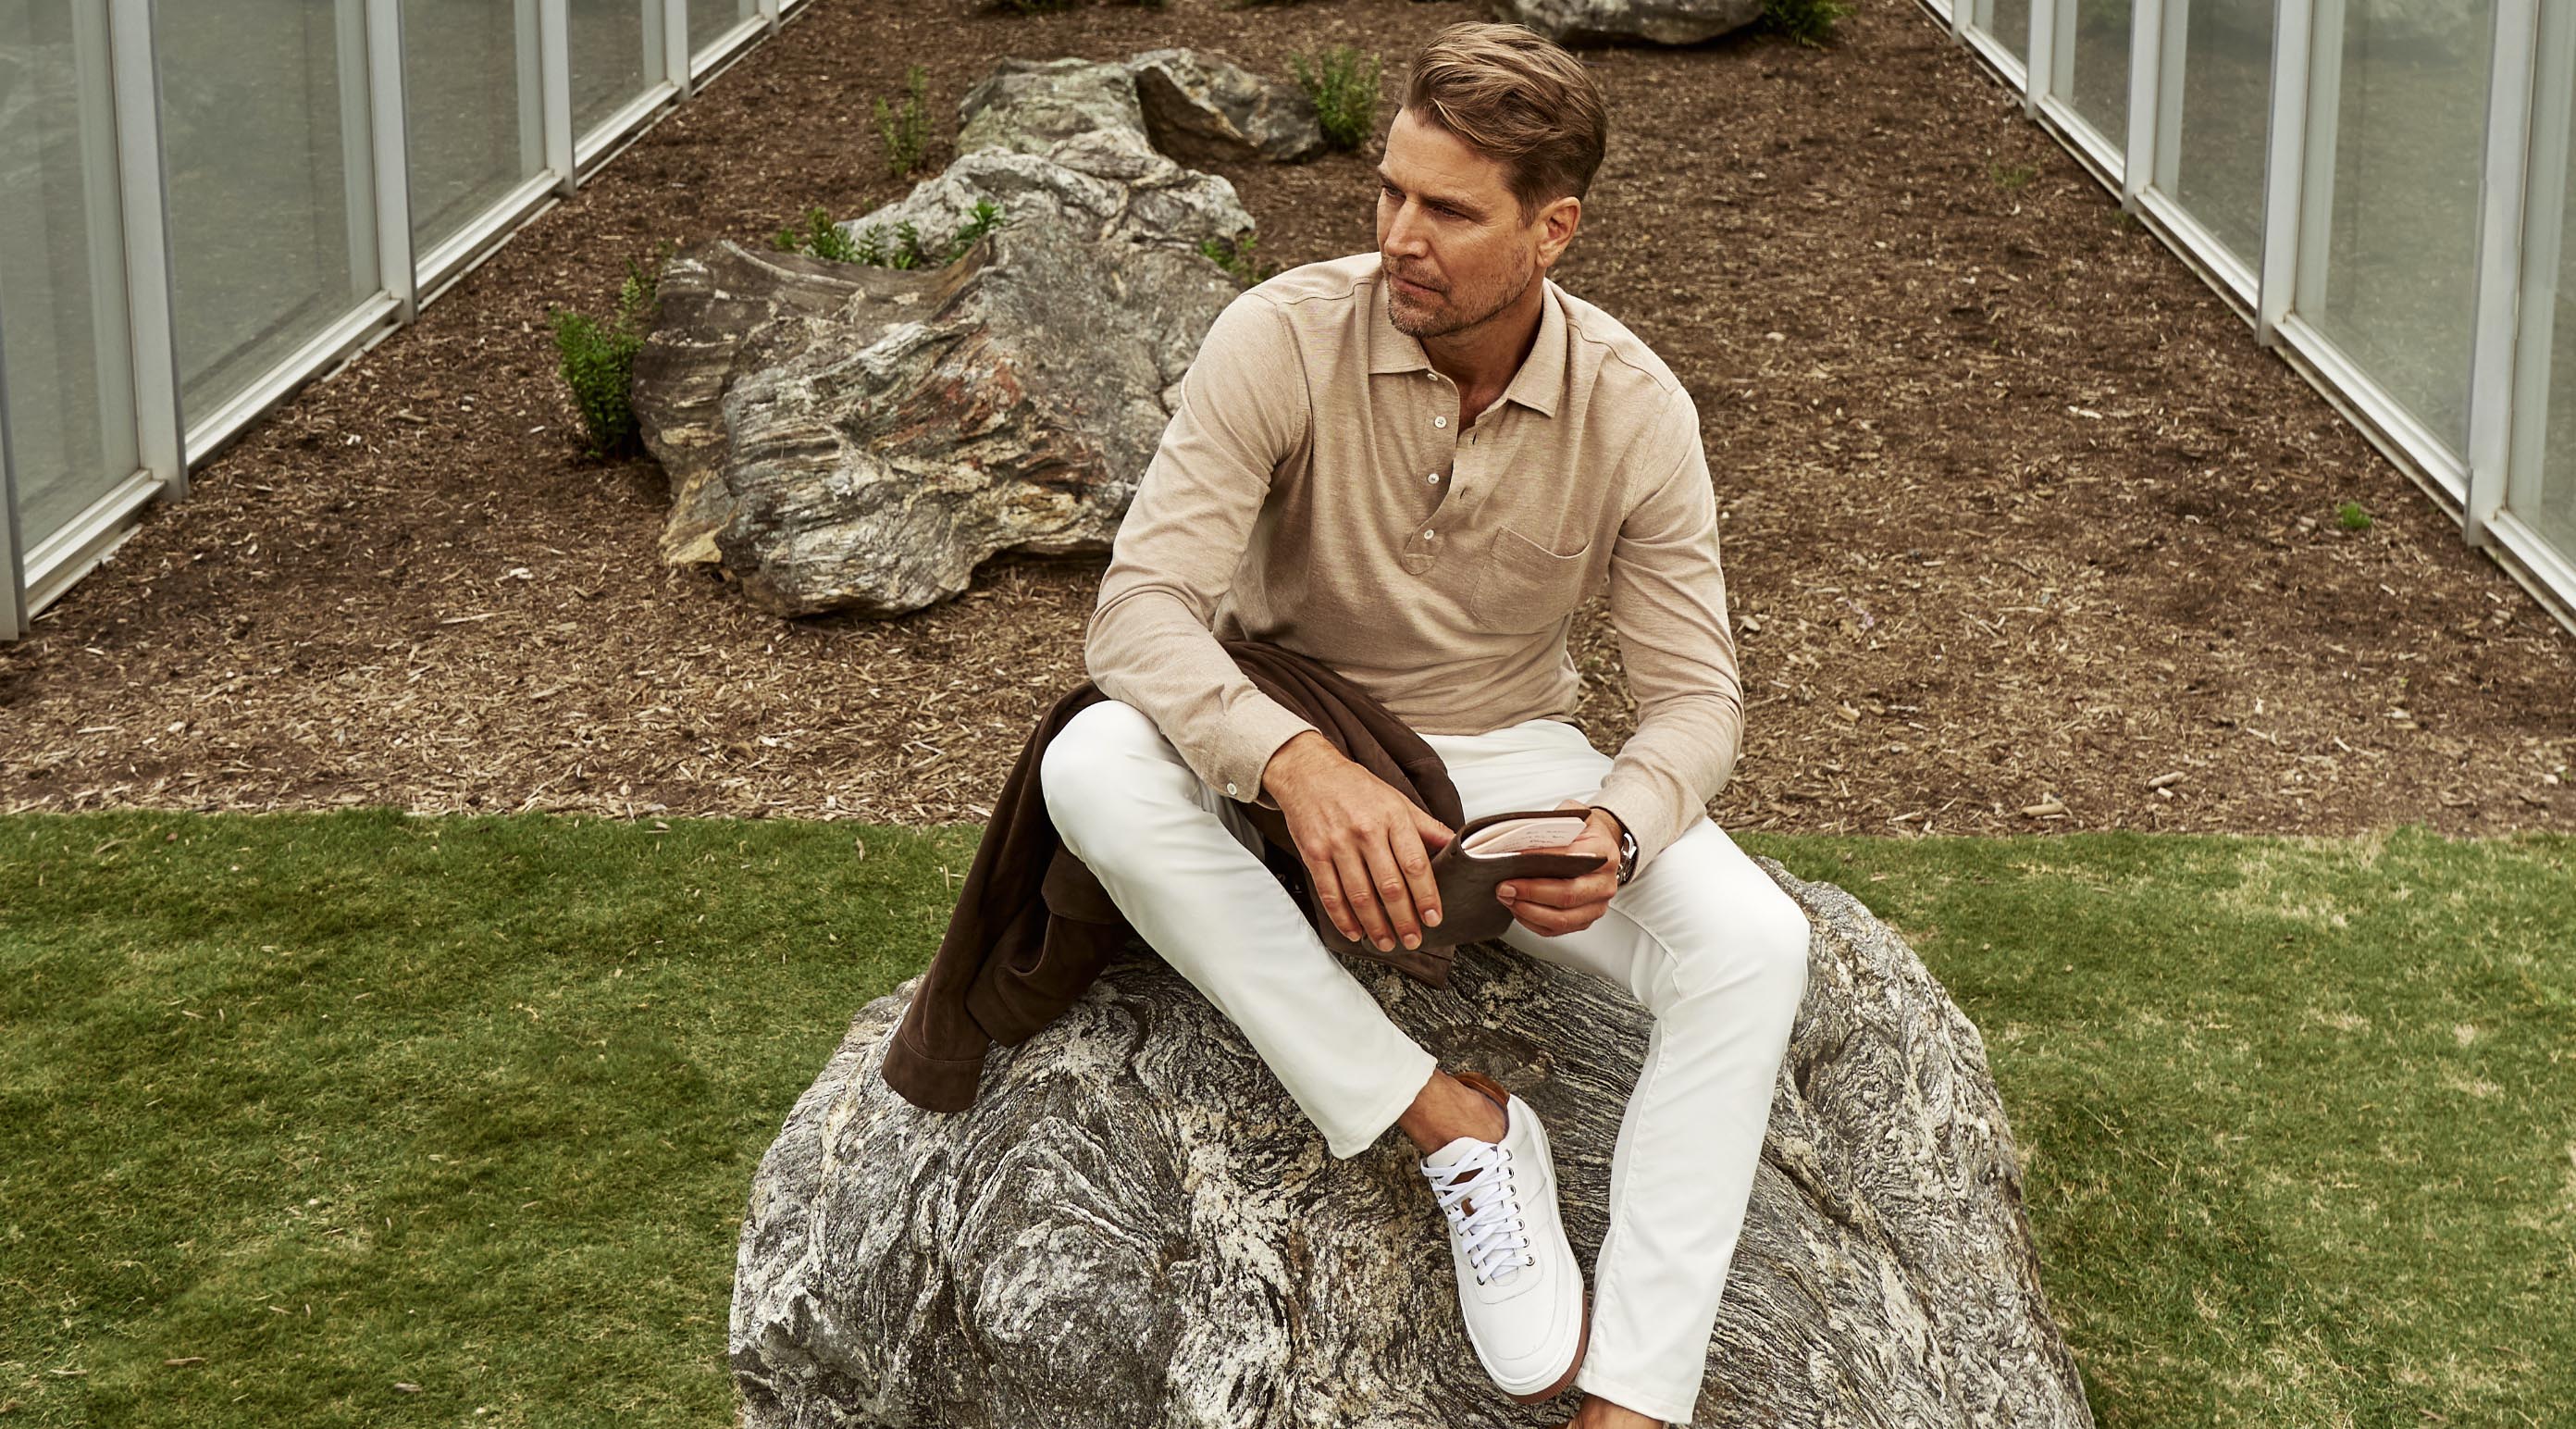 Men's Golf Pants: Elevate your Style & Performance